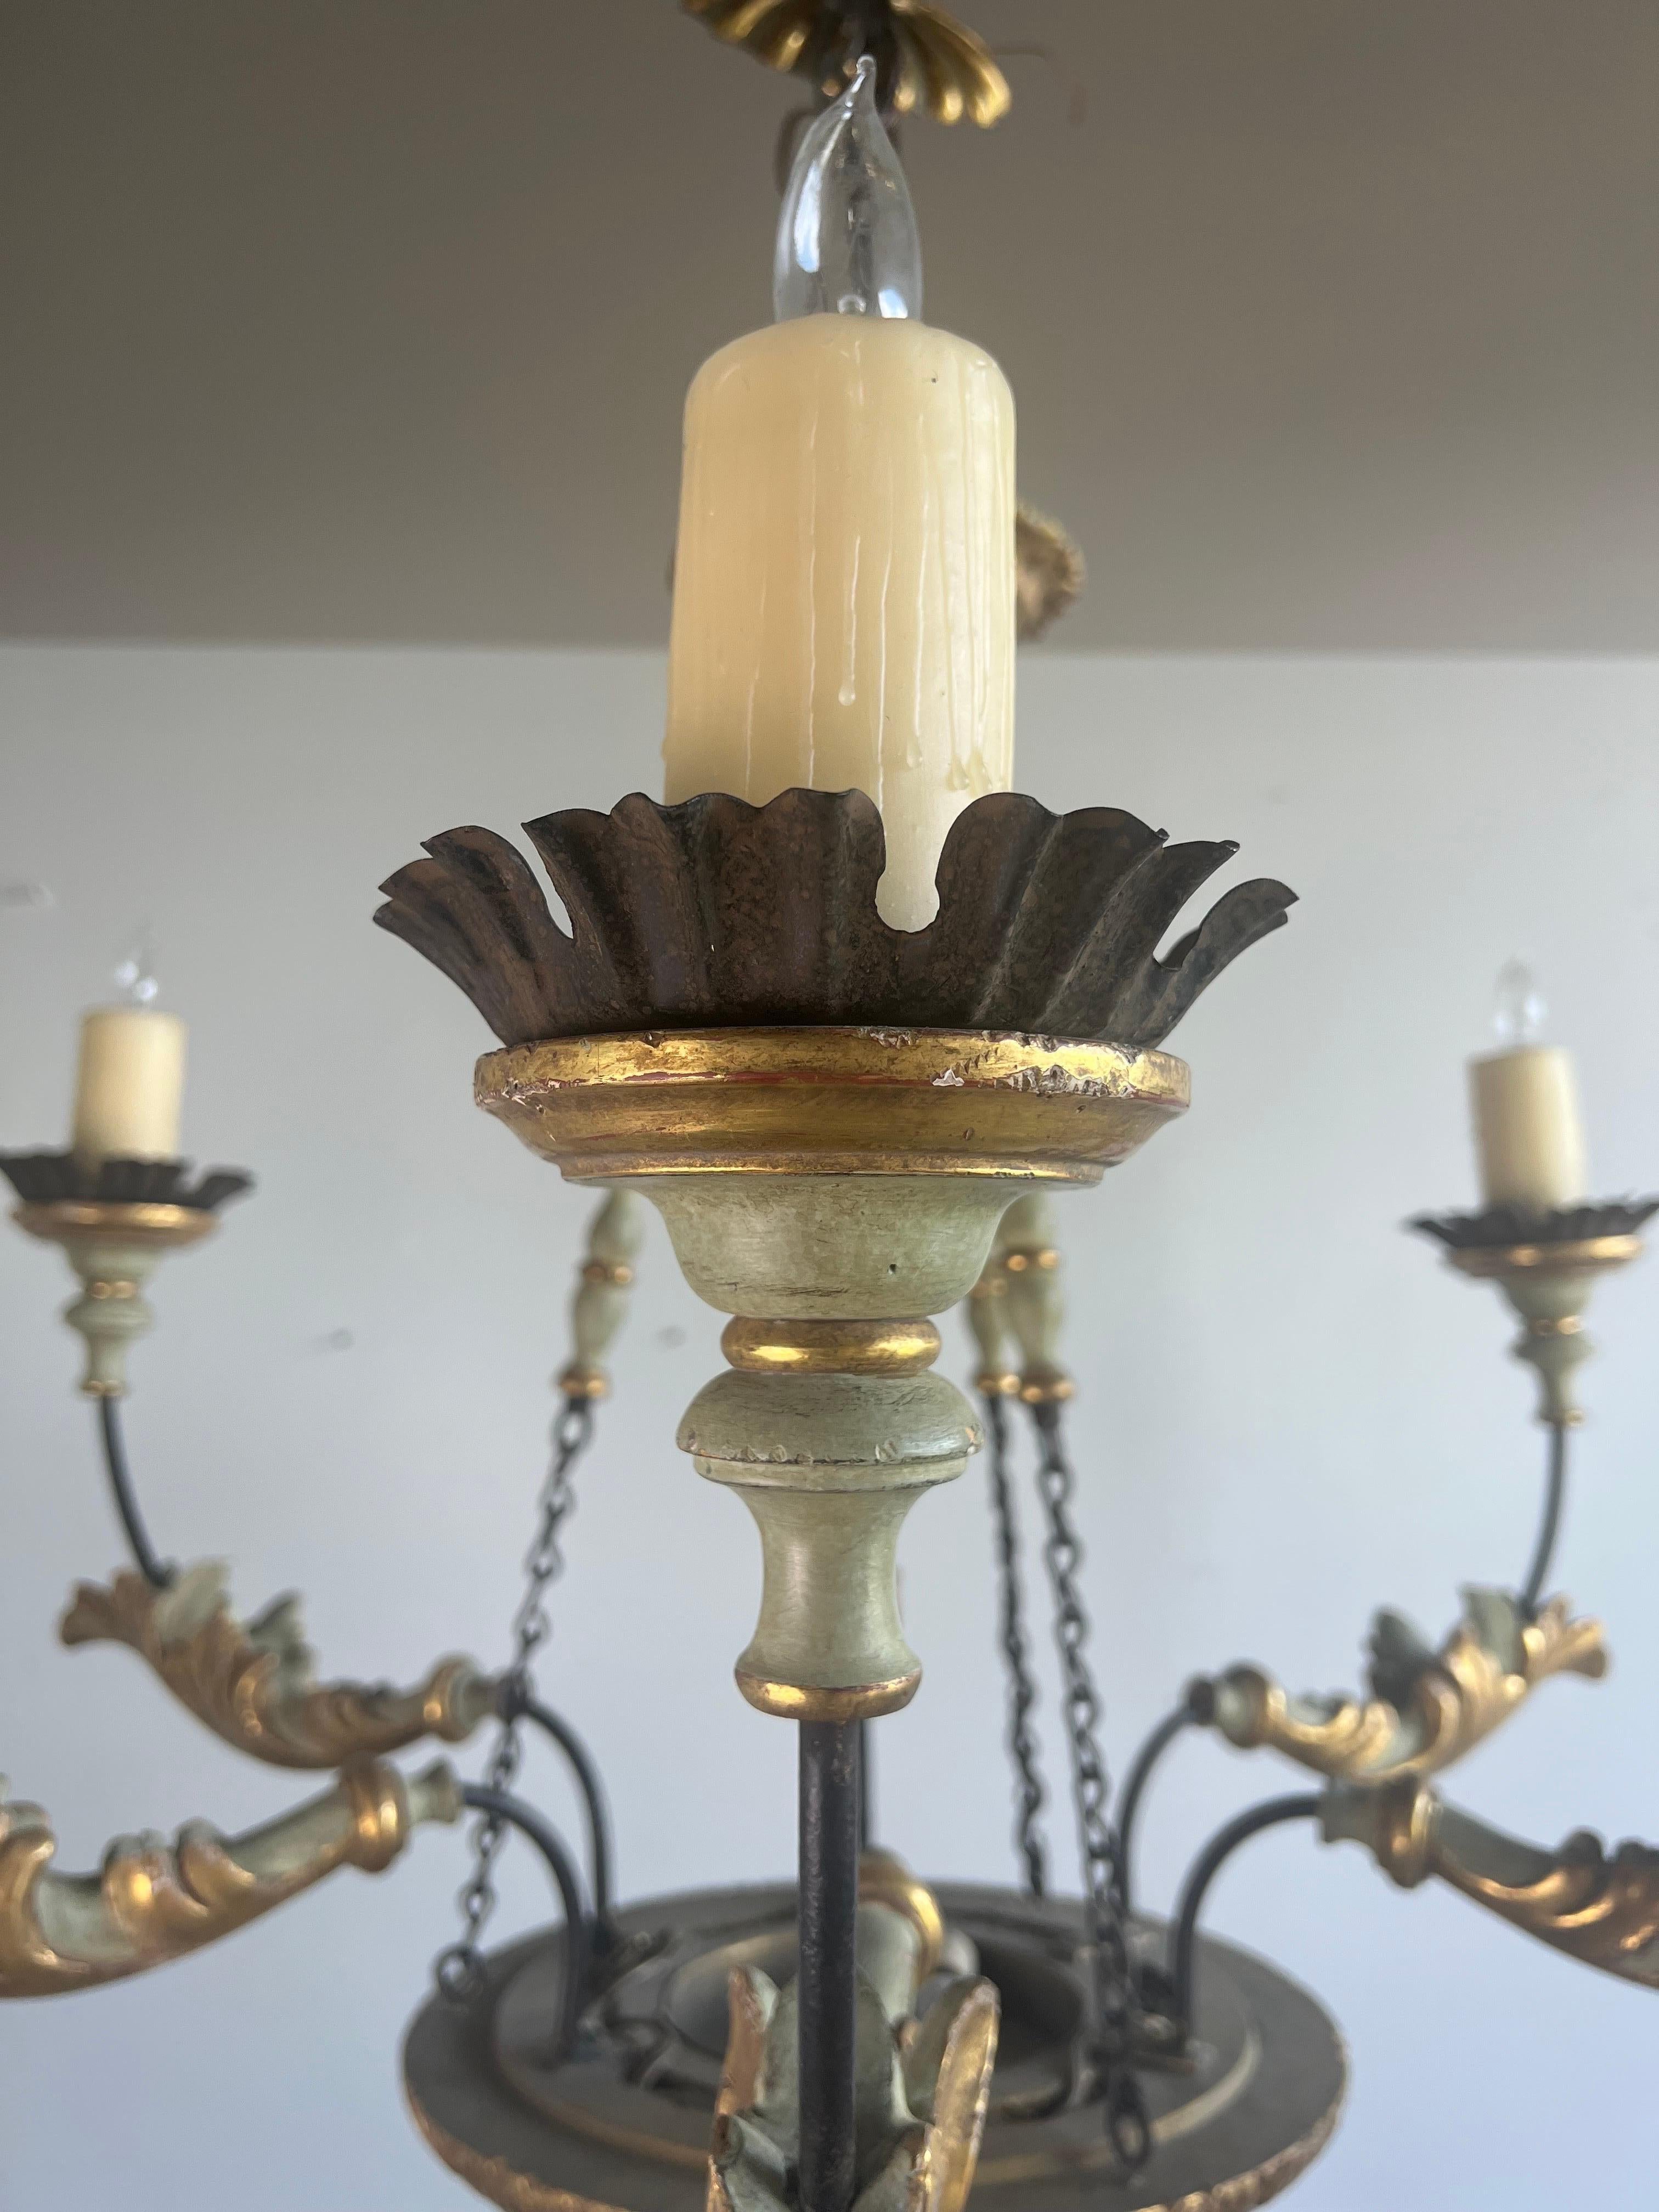 Italian style six light painted and parcel gilt chandelier with iron chain and accents.  Newly rewired with wax candle covers.  Includes chain and a beautiful carved wood canopy.